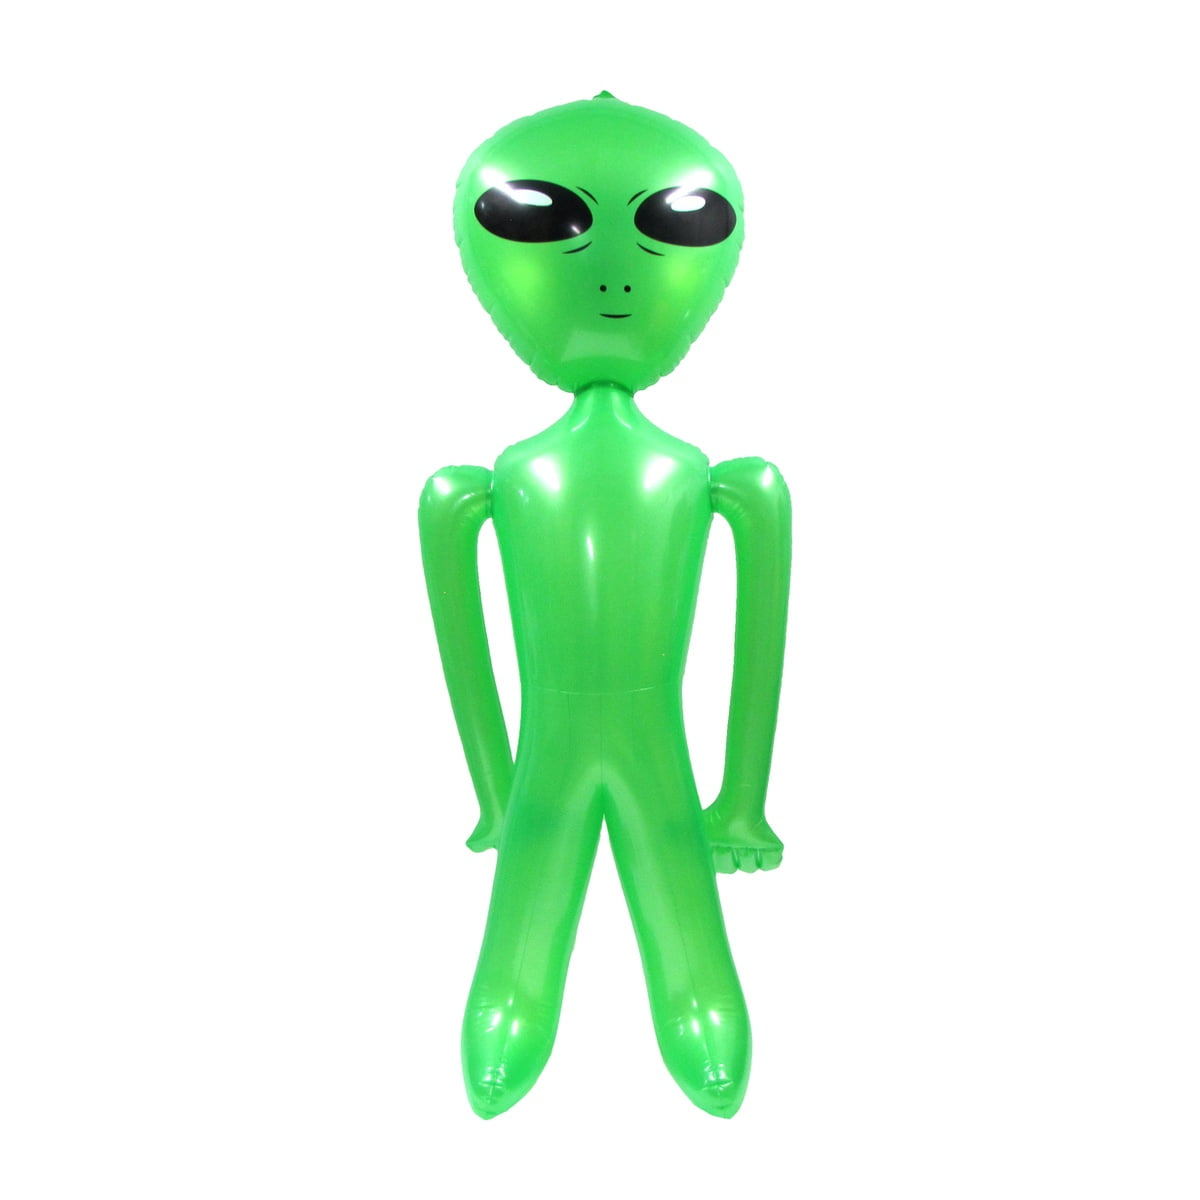 1 NEW INFLATABLE GREEN SPACE ALIEN 60" BLOW UP INFLATE ALIENS HALLOWEEN GAG GIFT 